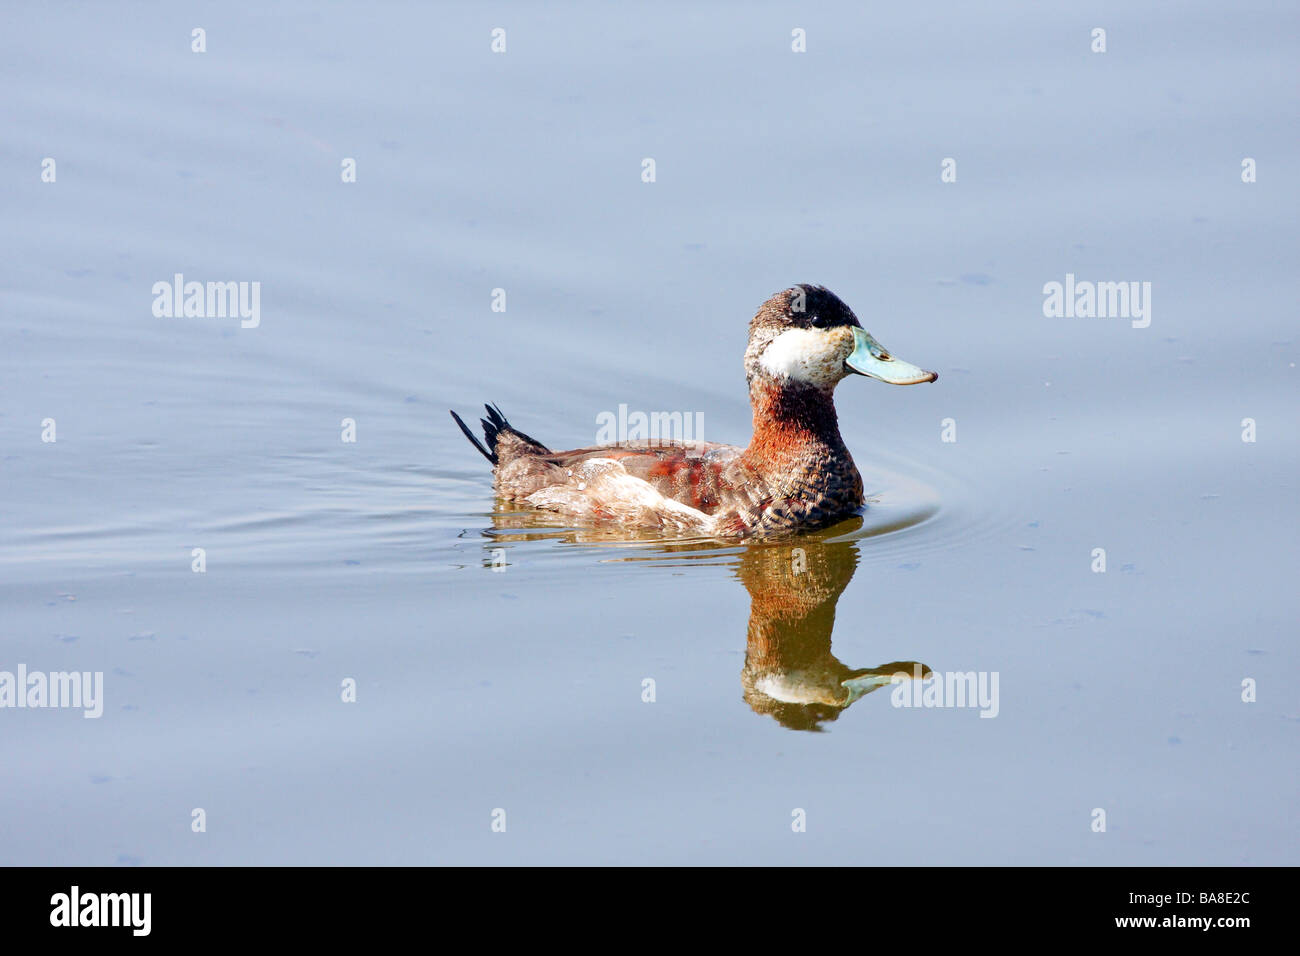 Ruddy Duck swimming with reflection Stock Photo